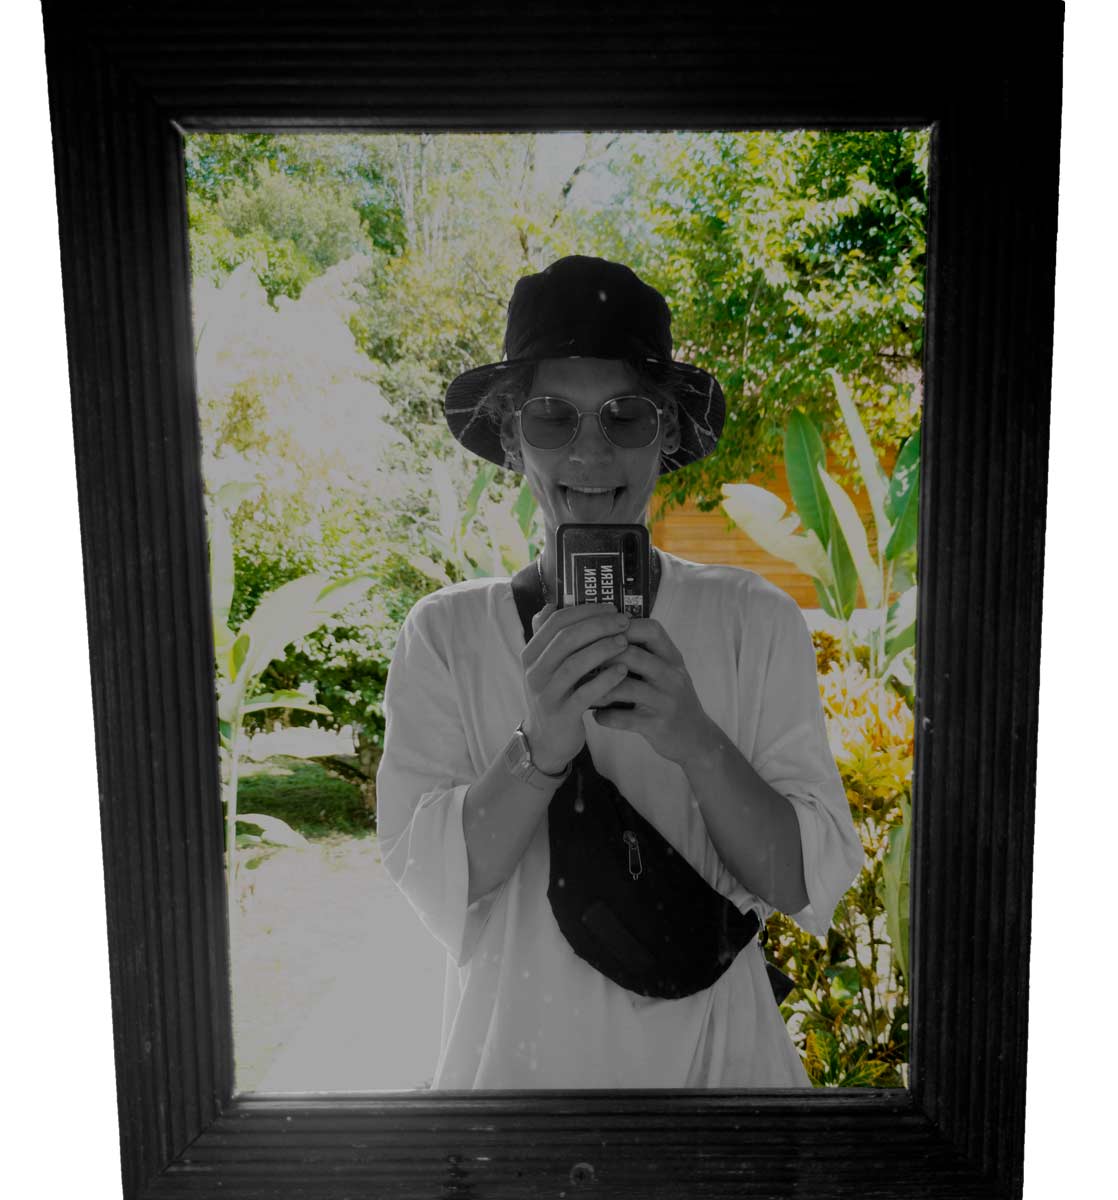 Nodlon photo shot in a mirror with plants in the background.